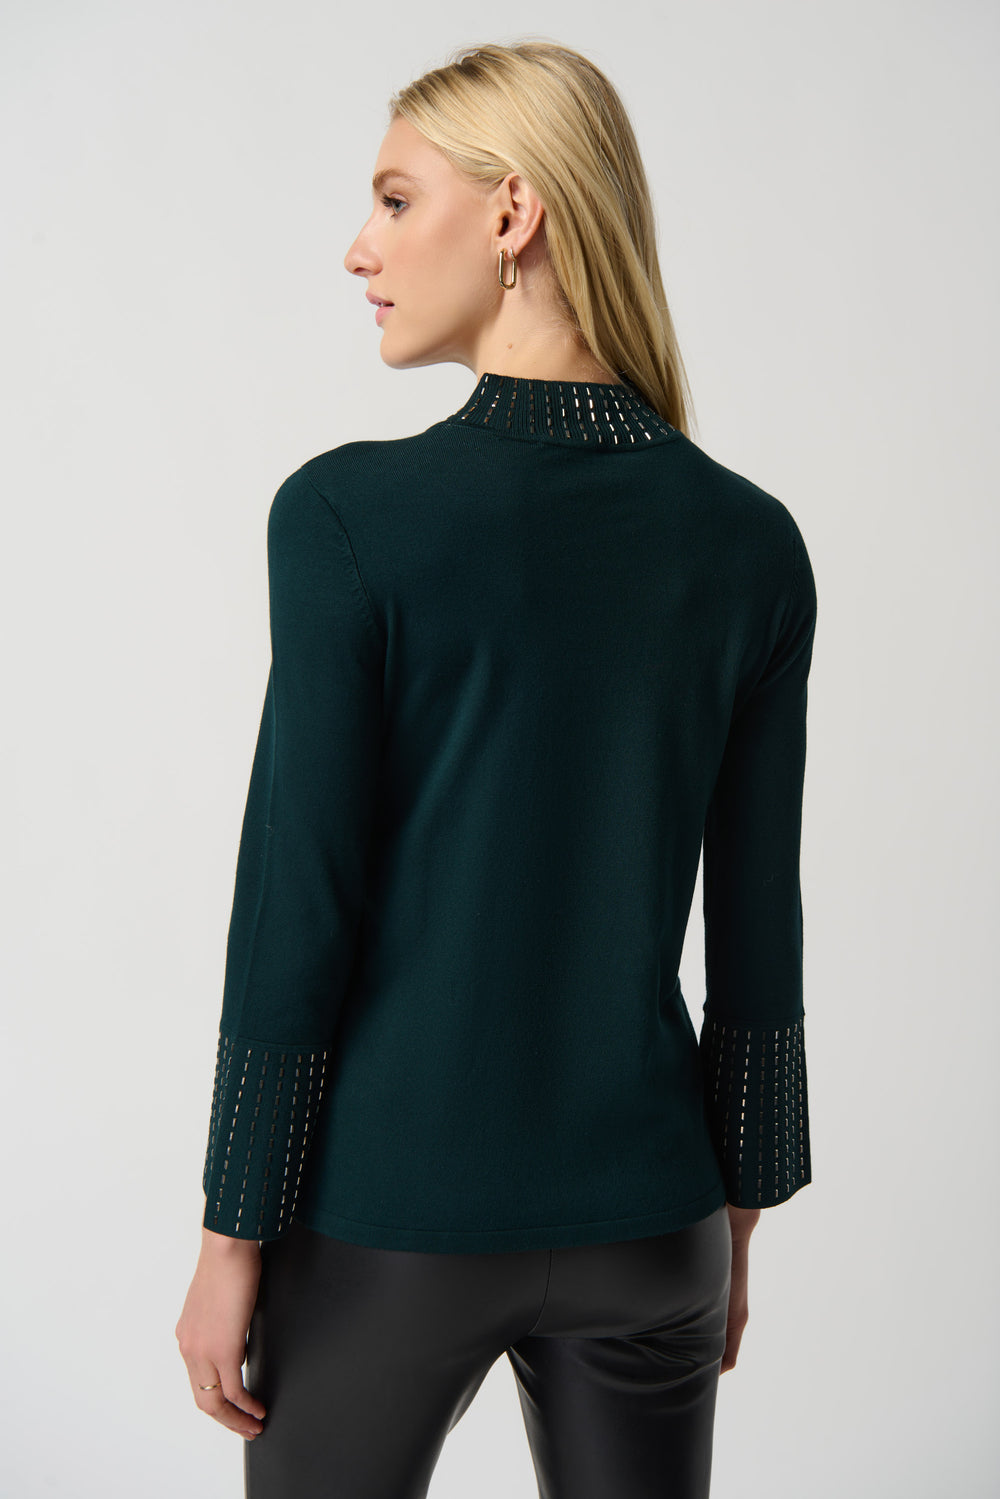 Joseph Ribkoff Embellished Sweater With Bell Sleeve and Mock Neck Style 23492 - Alpine Green